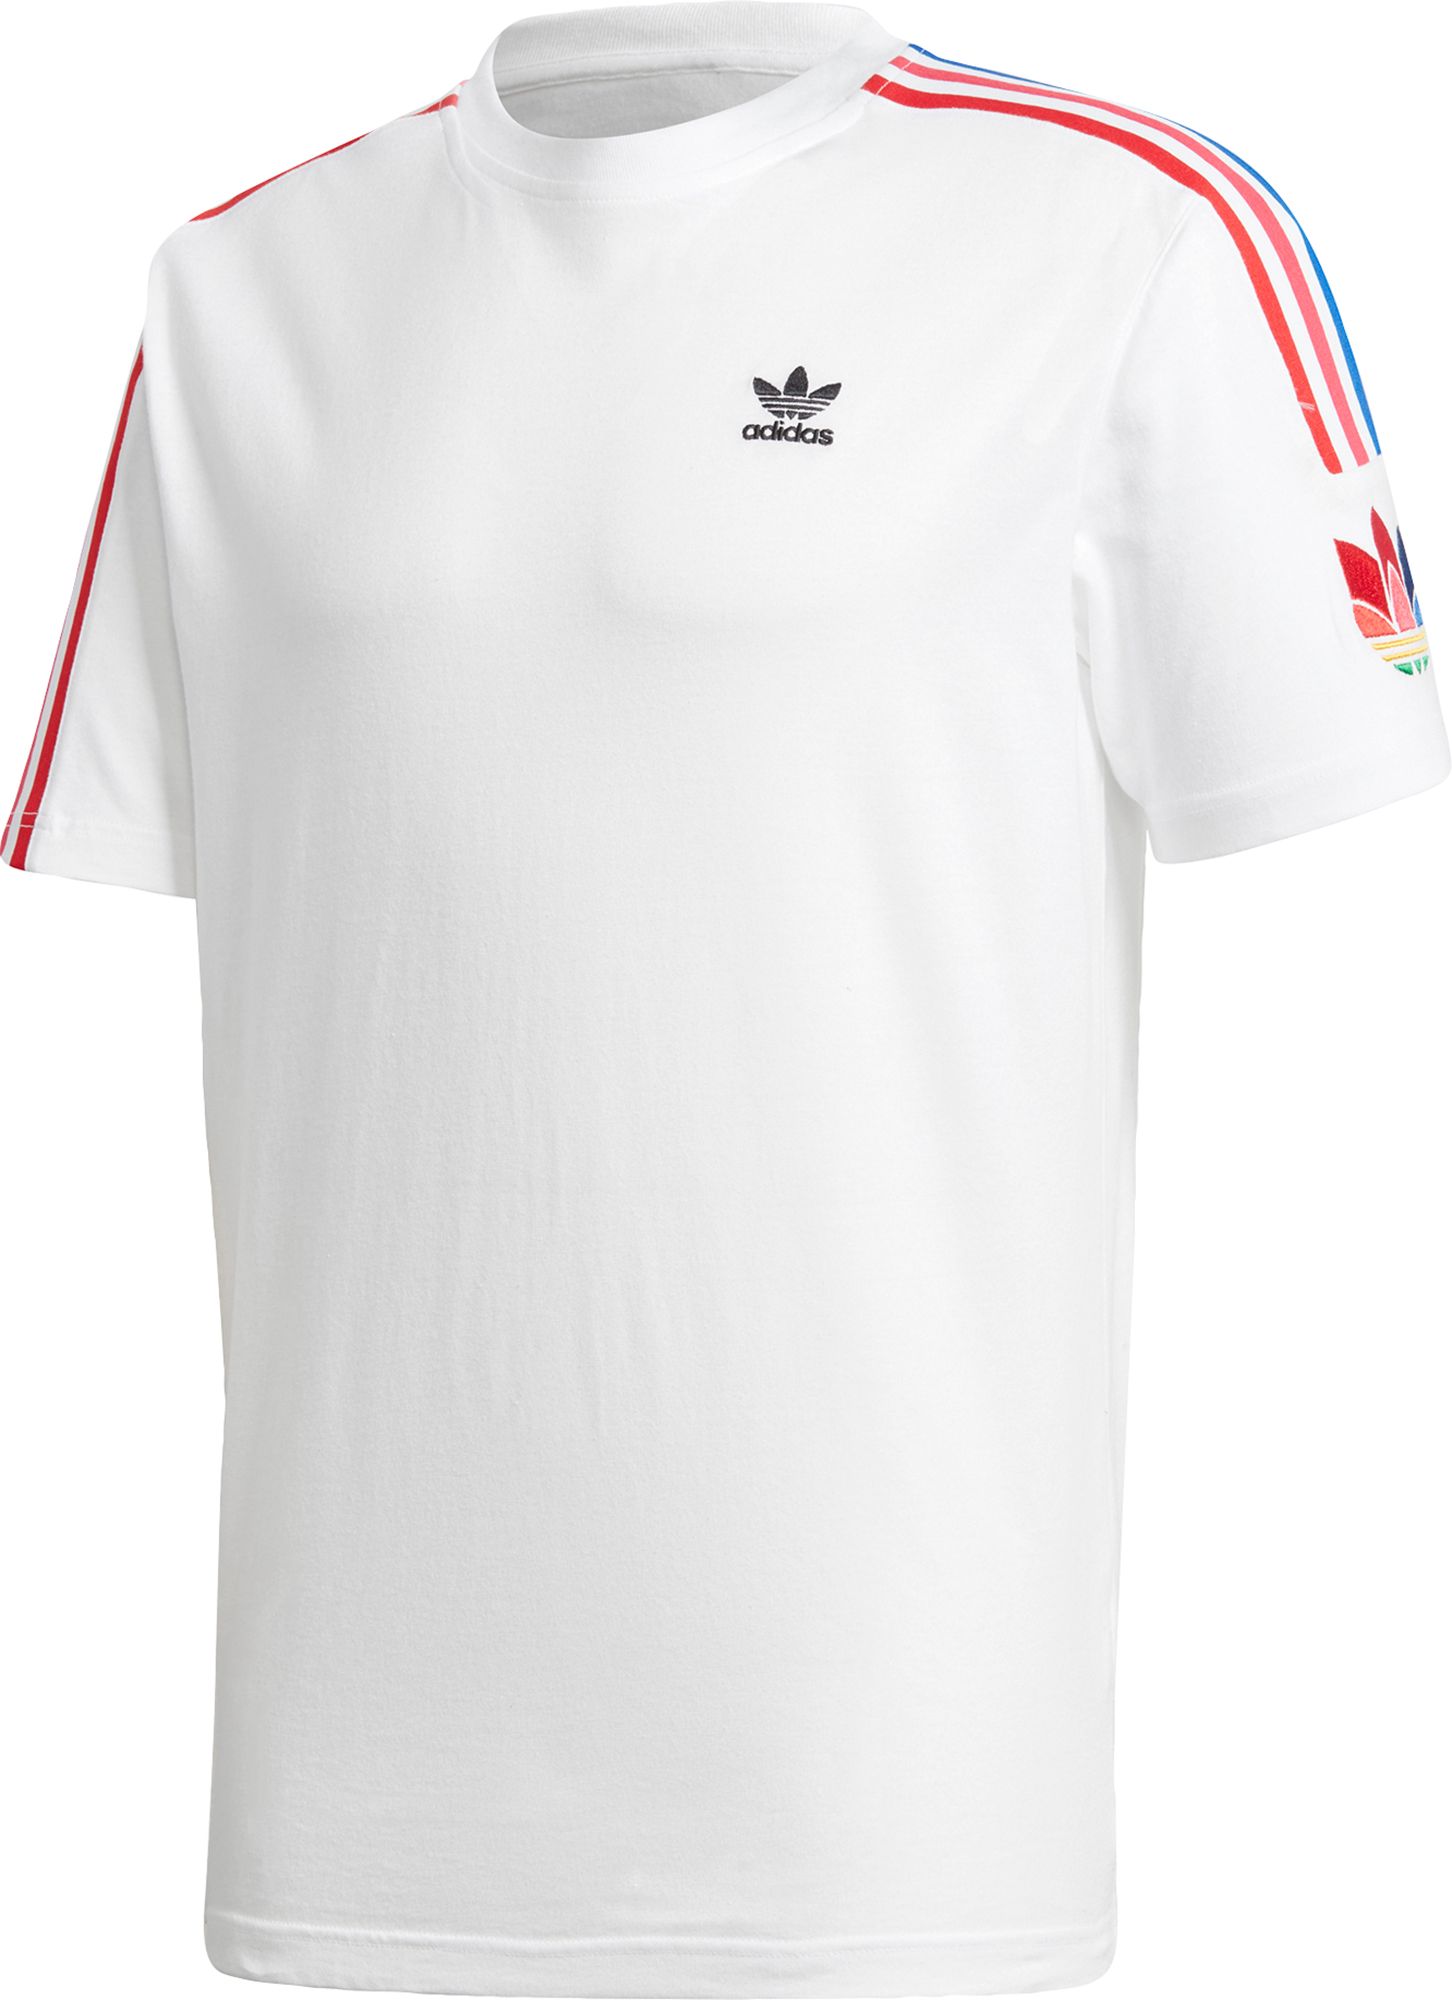 adidas t shirt red and white